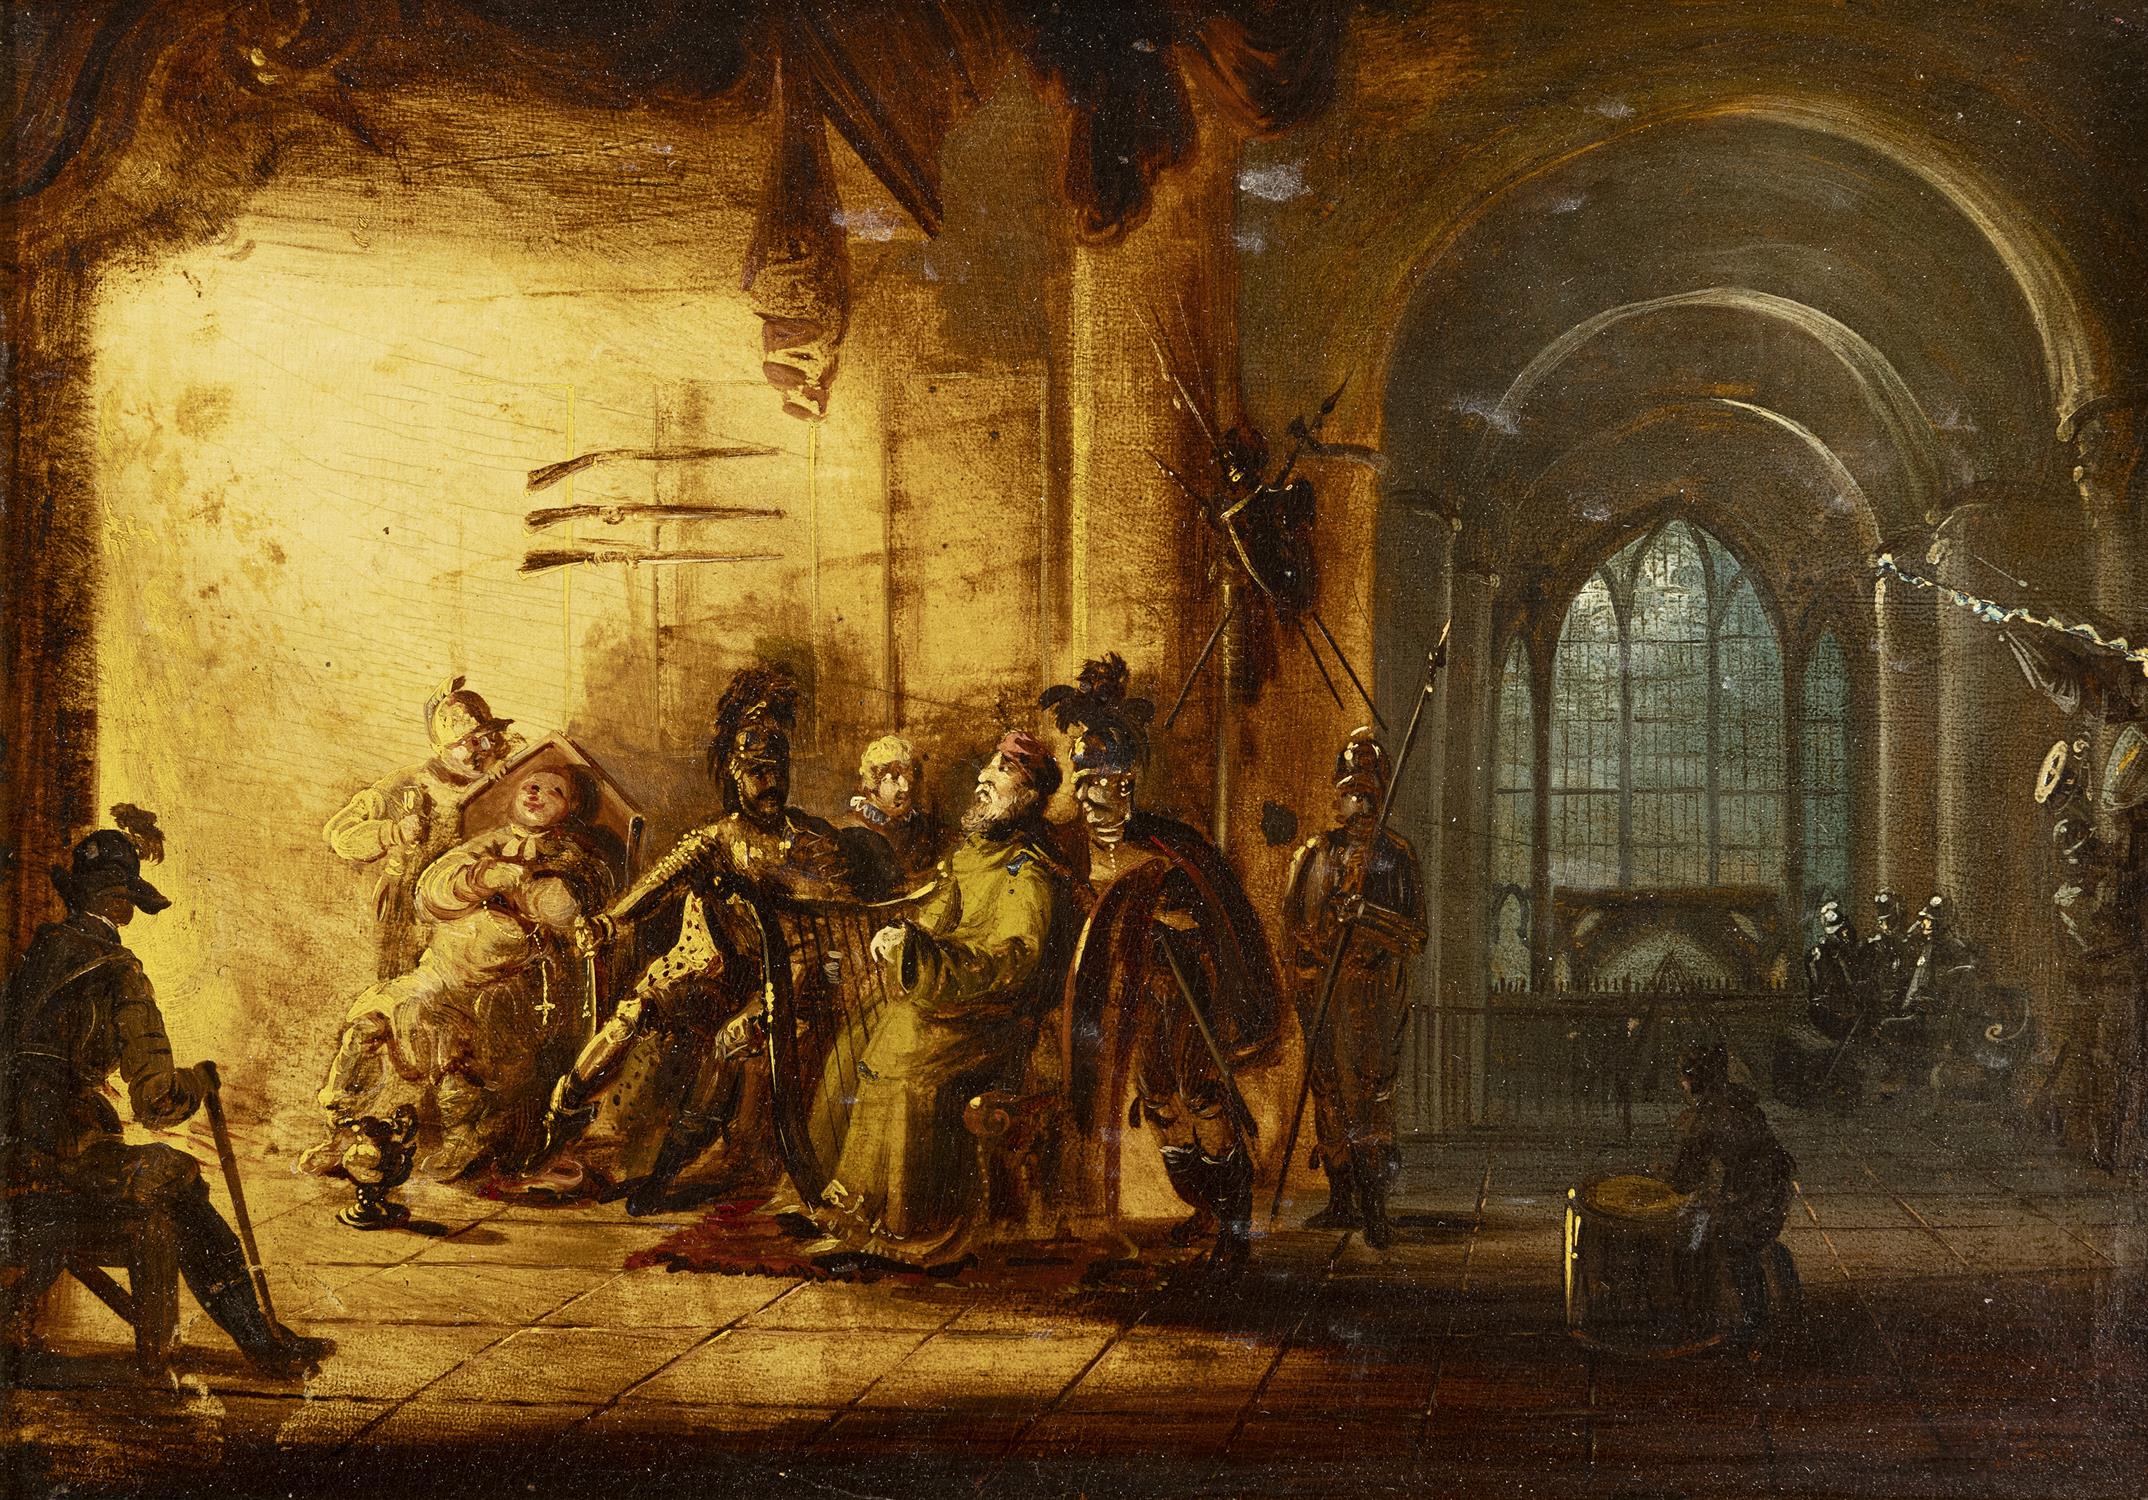 William Sadler II (1782-1839) Baronial Interior with Monks, Soldiers and a Harpist Oil on panel,